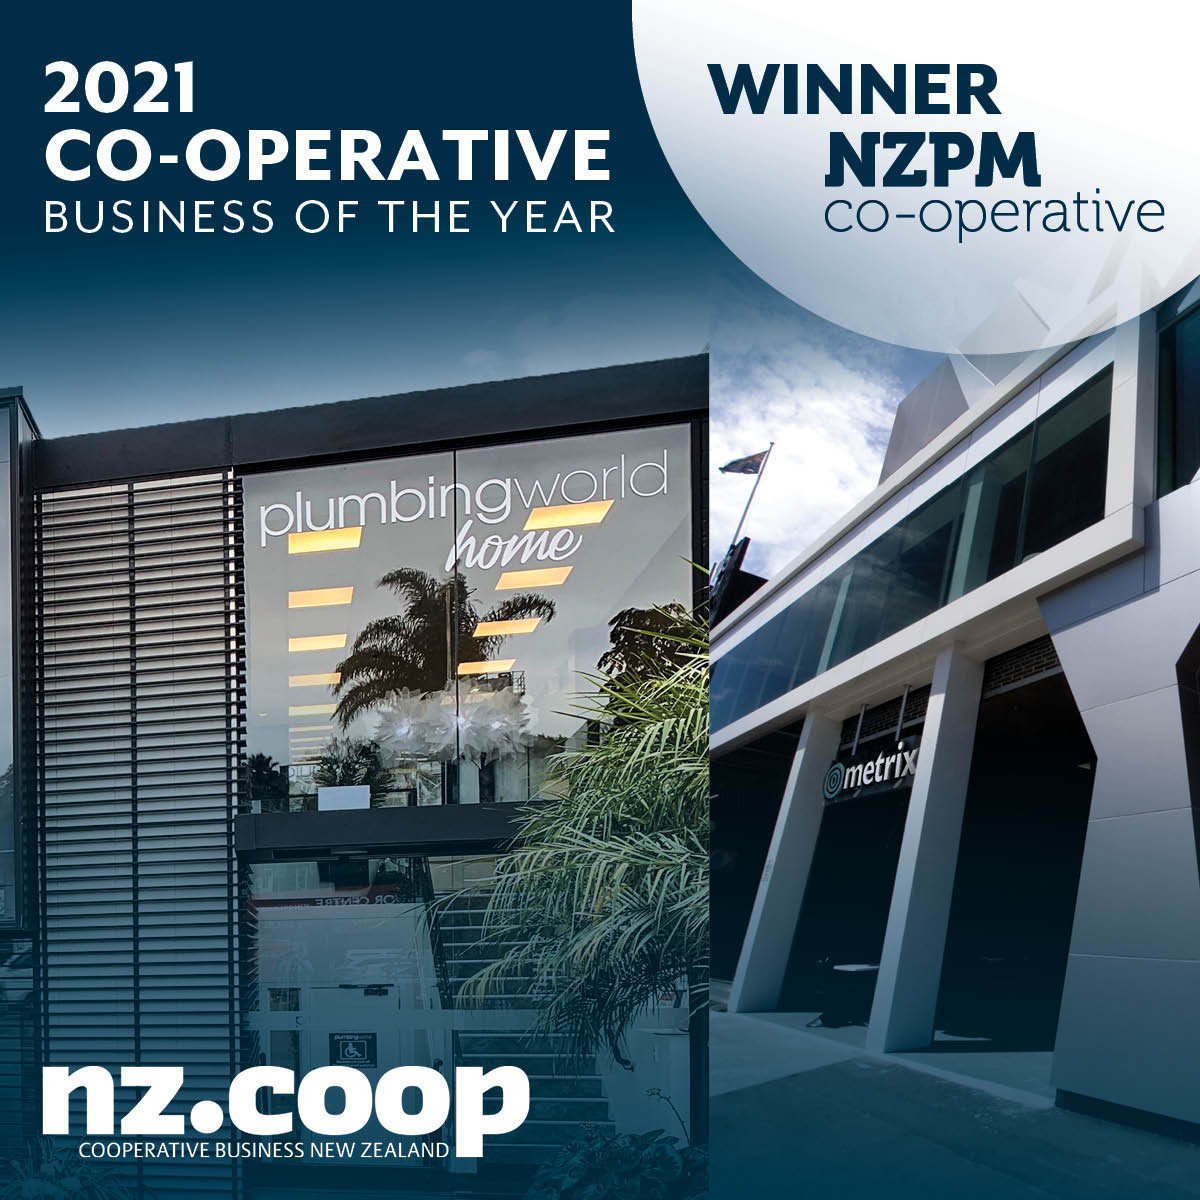 NZPM 2021 Cooperative Business of the year